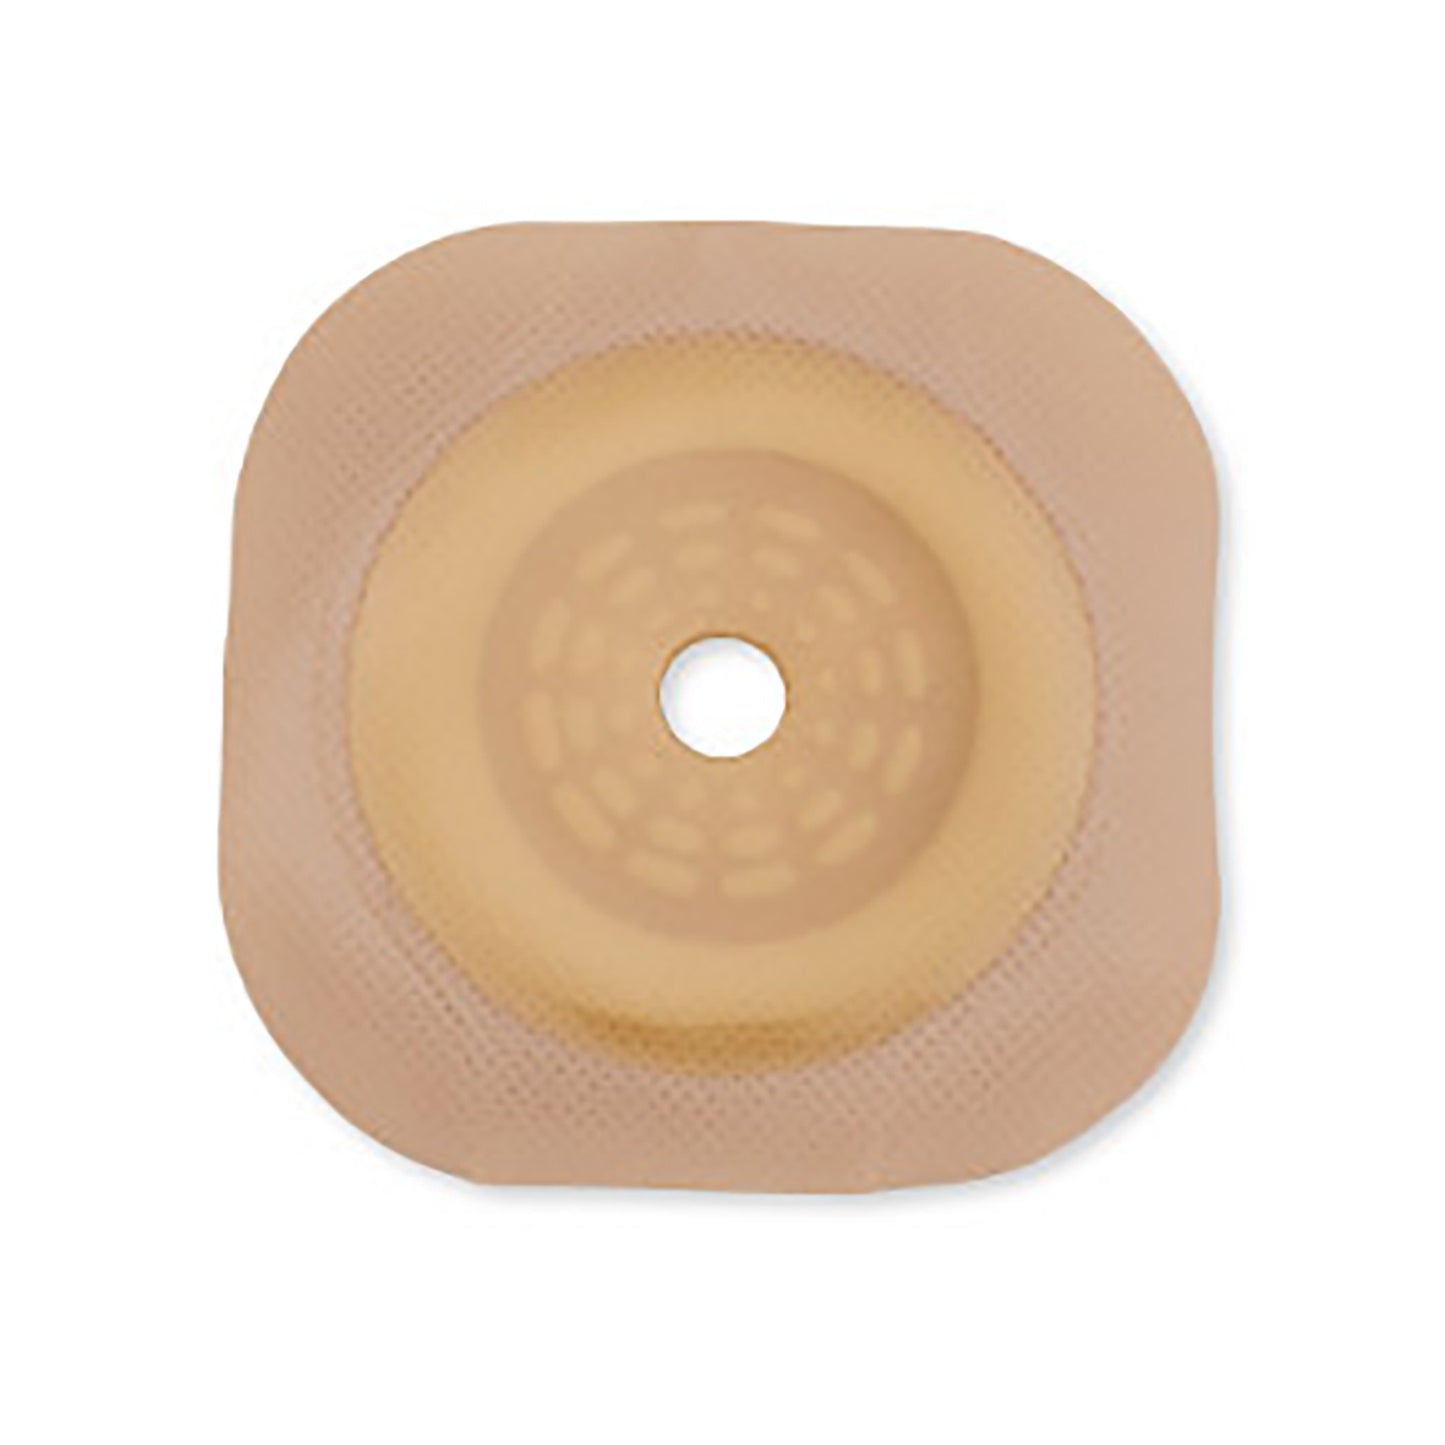 New Image CeraPlus Skin Barrier Trim to Fit 11204